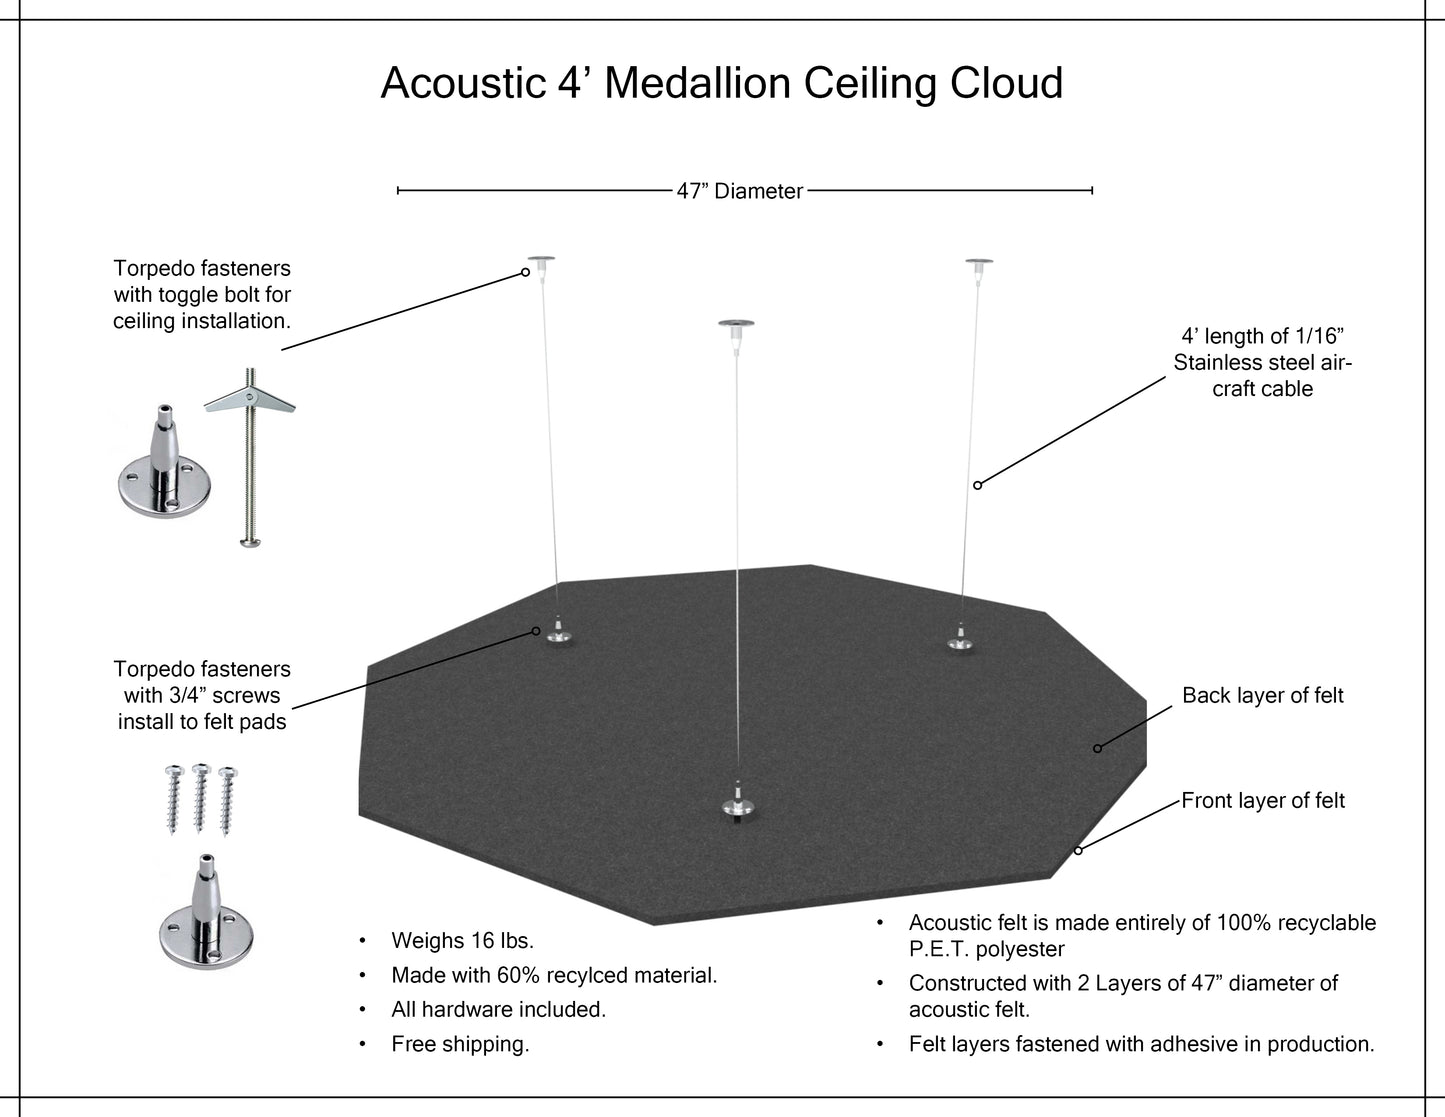 Medallion Acoustic Ceiling Cloud - Pulled Squares